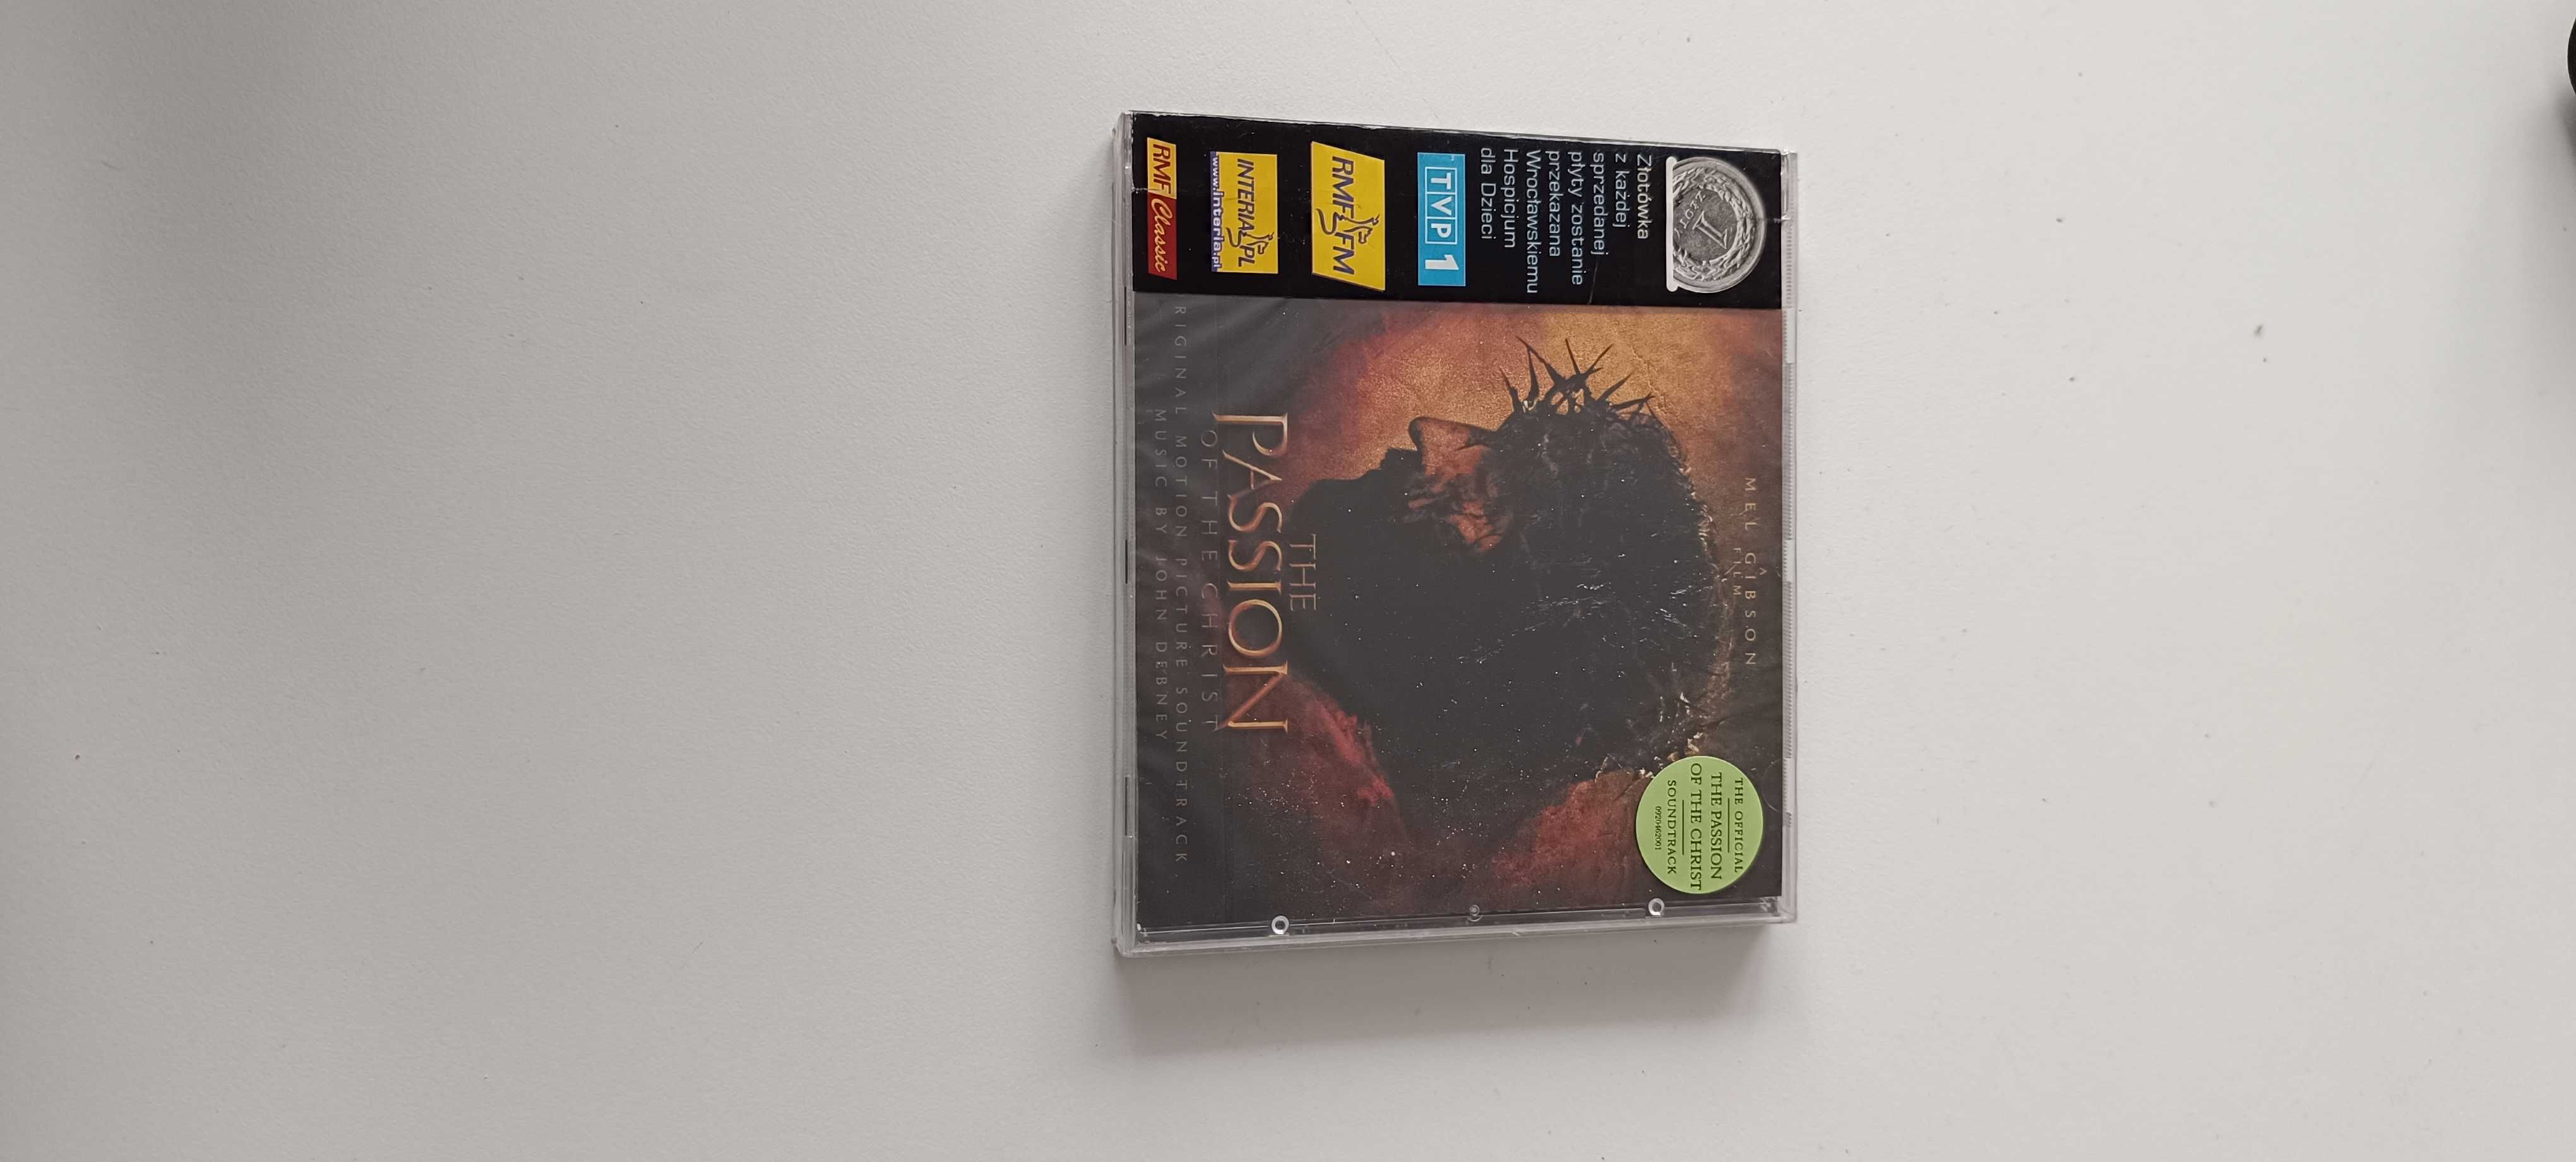 cd nowe The Passion Of The Christ - Original Motion Picture Soundtrack